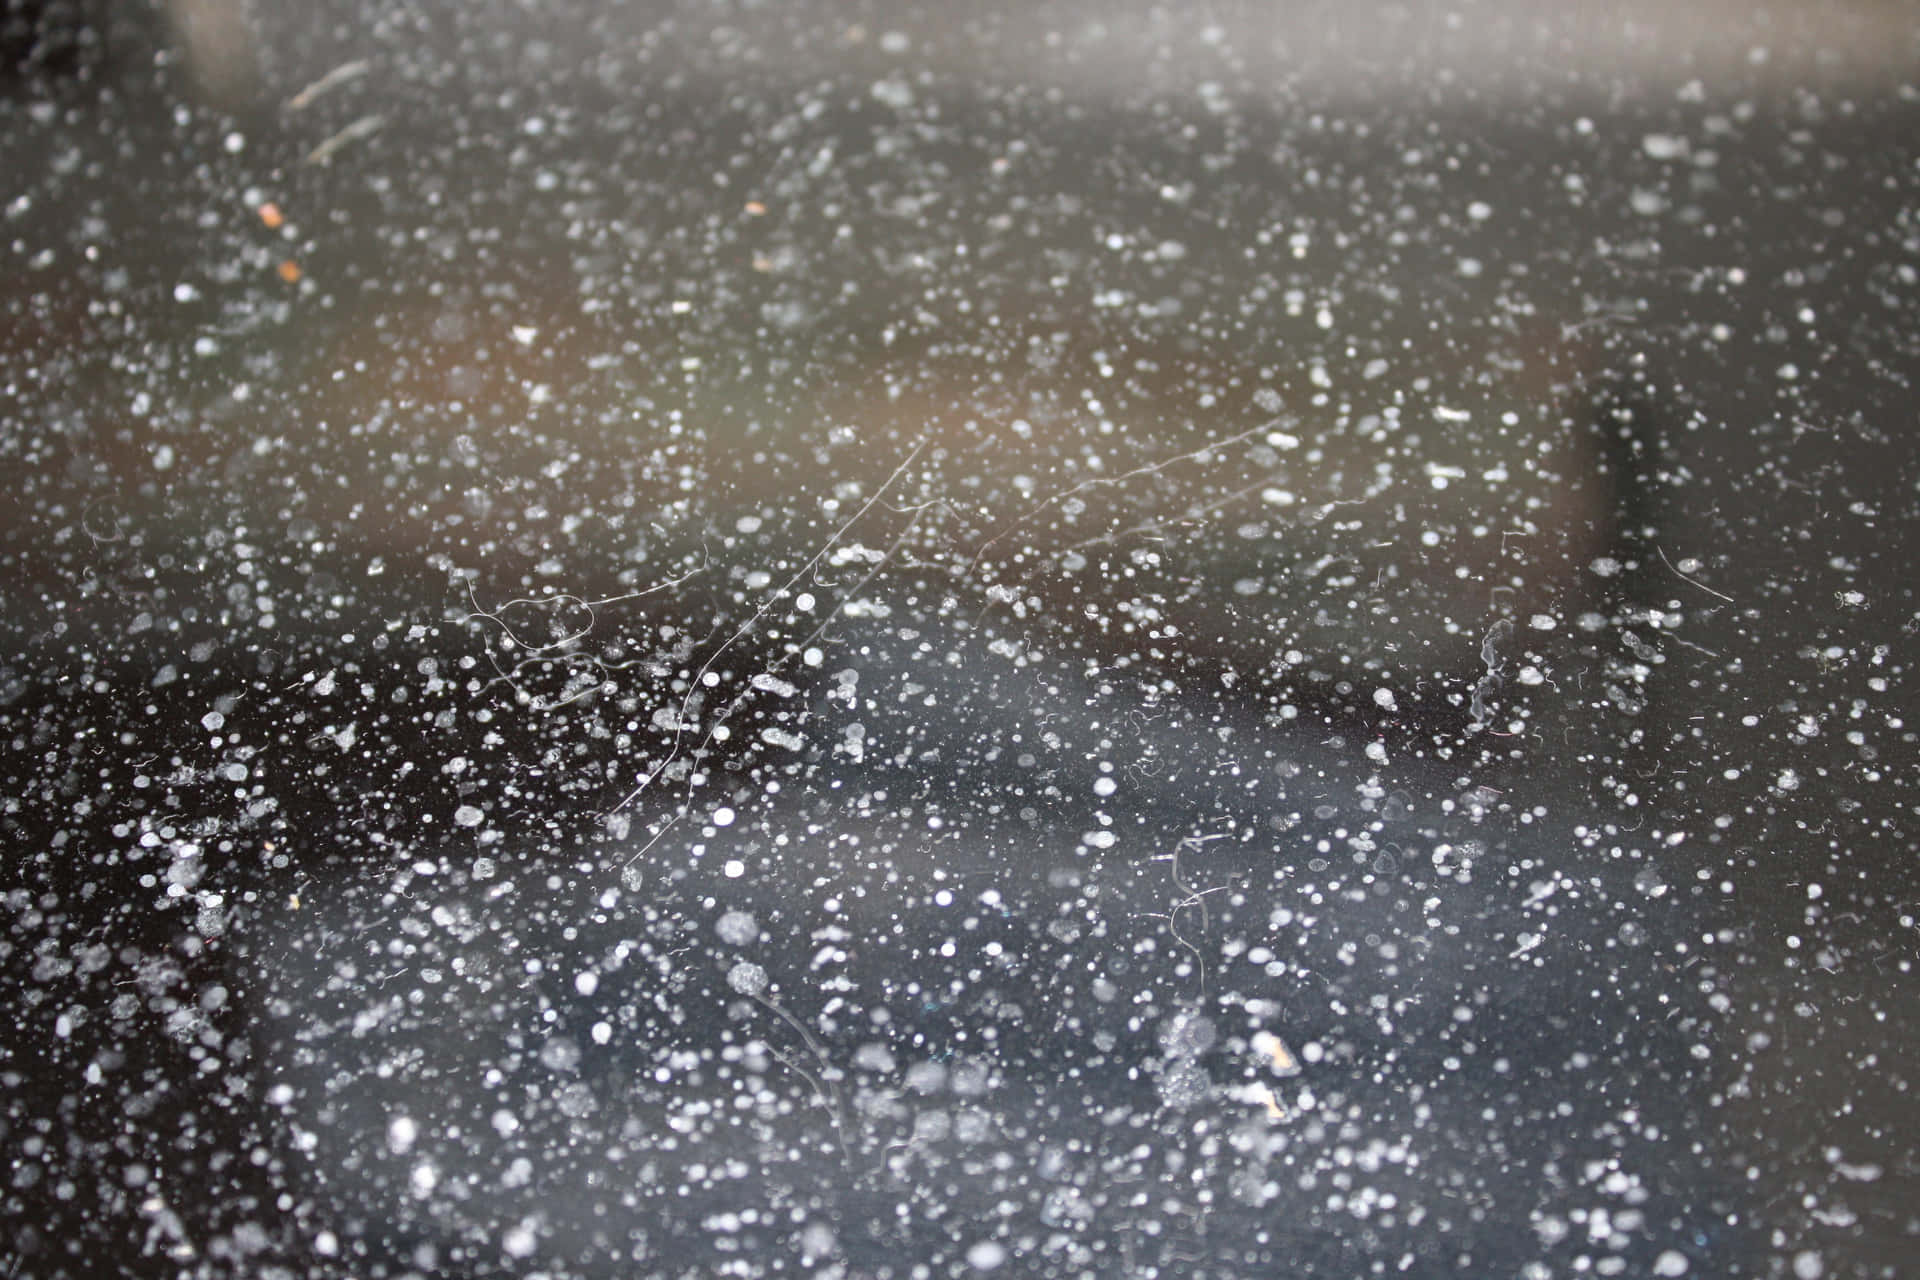 A Window With Water Drops On It